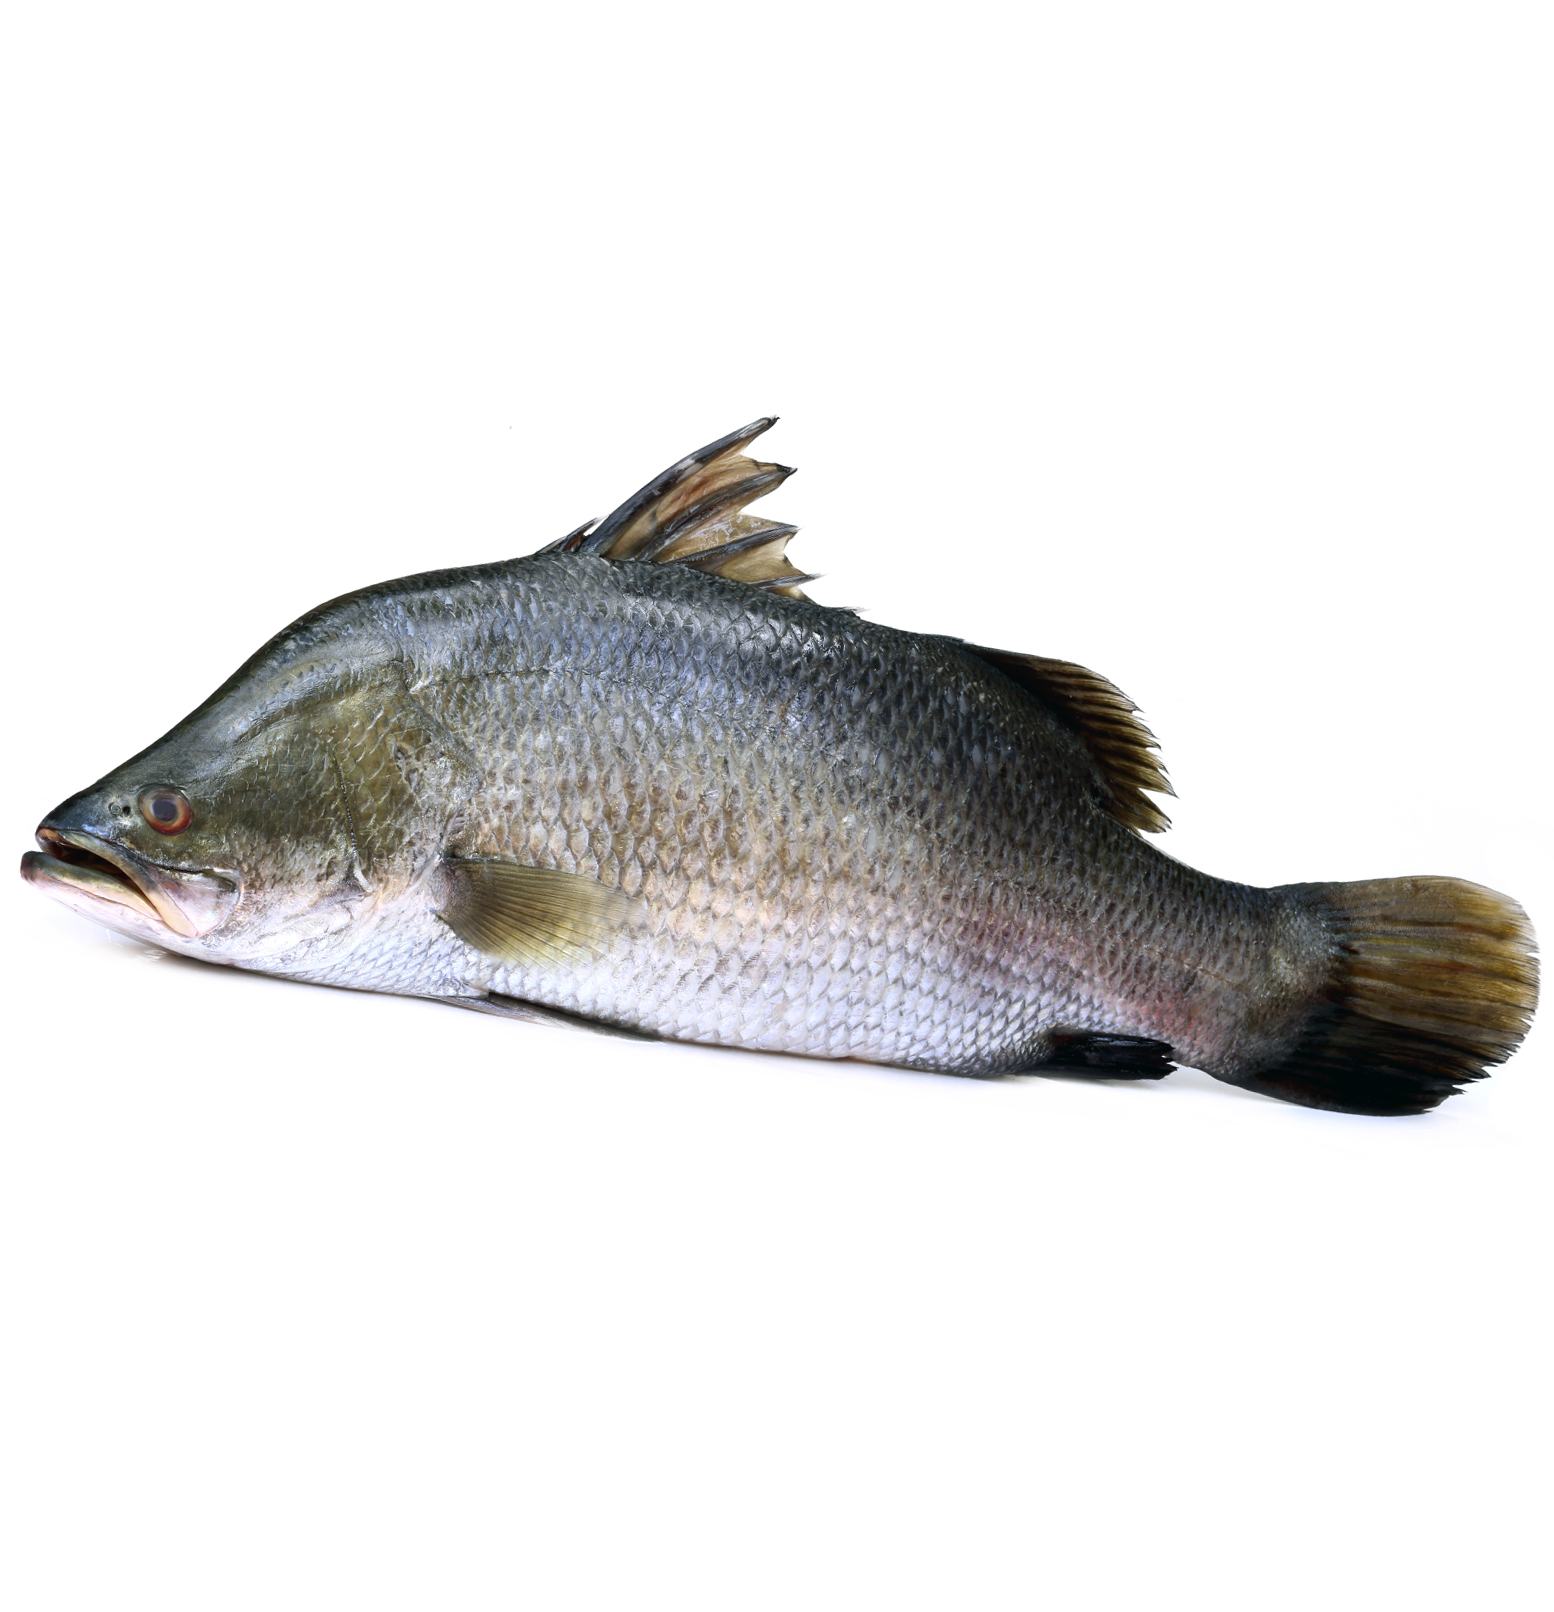 What in the World is a Seabass?  The Better Fish® Barramundi by Australis  Aquaculture